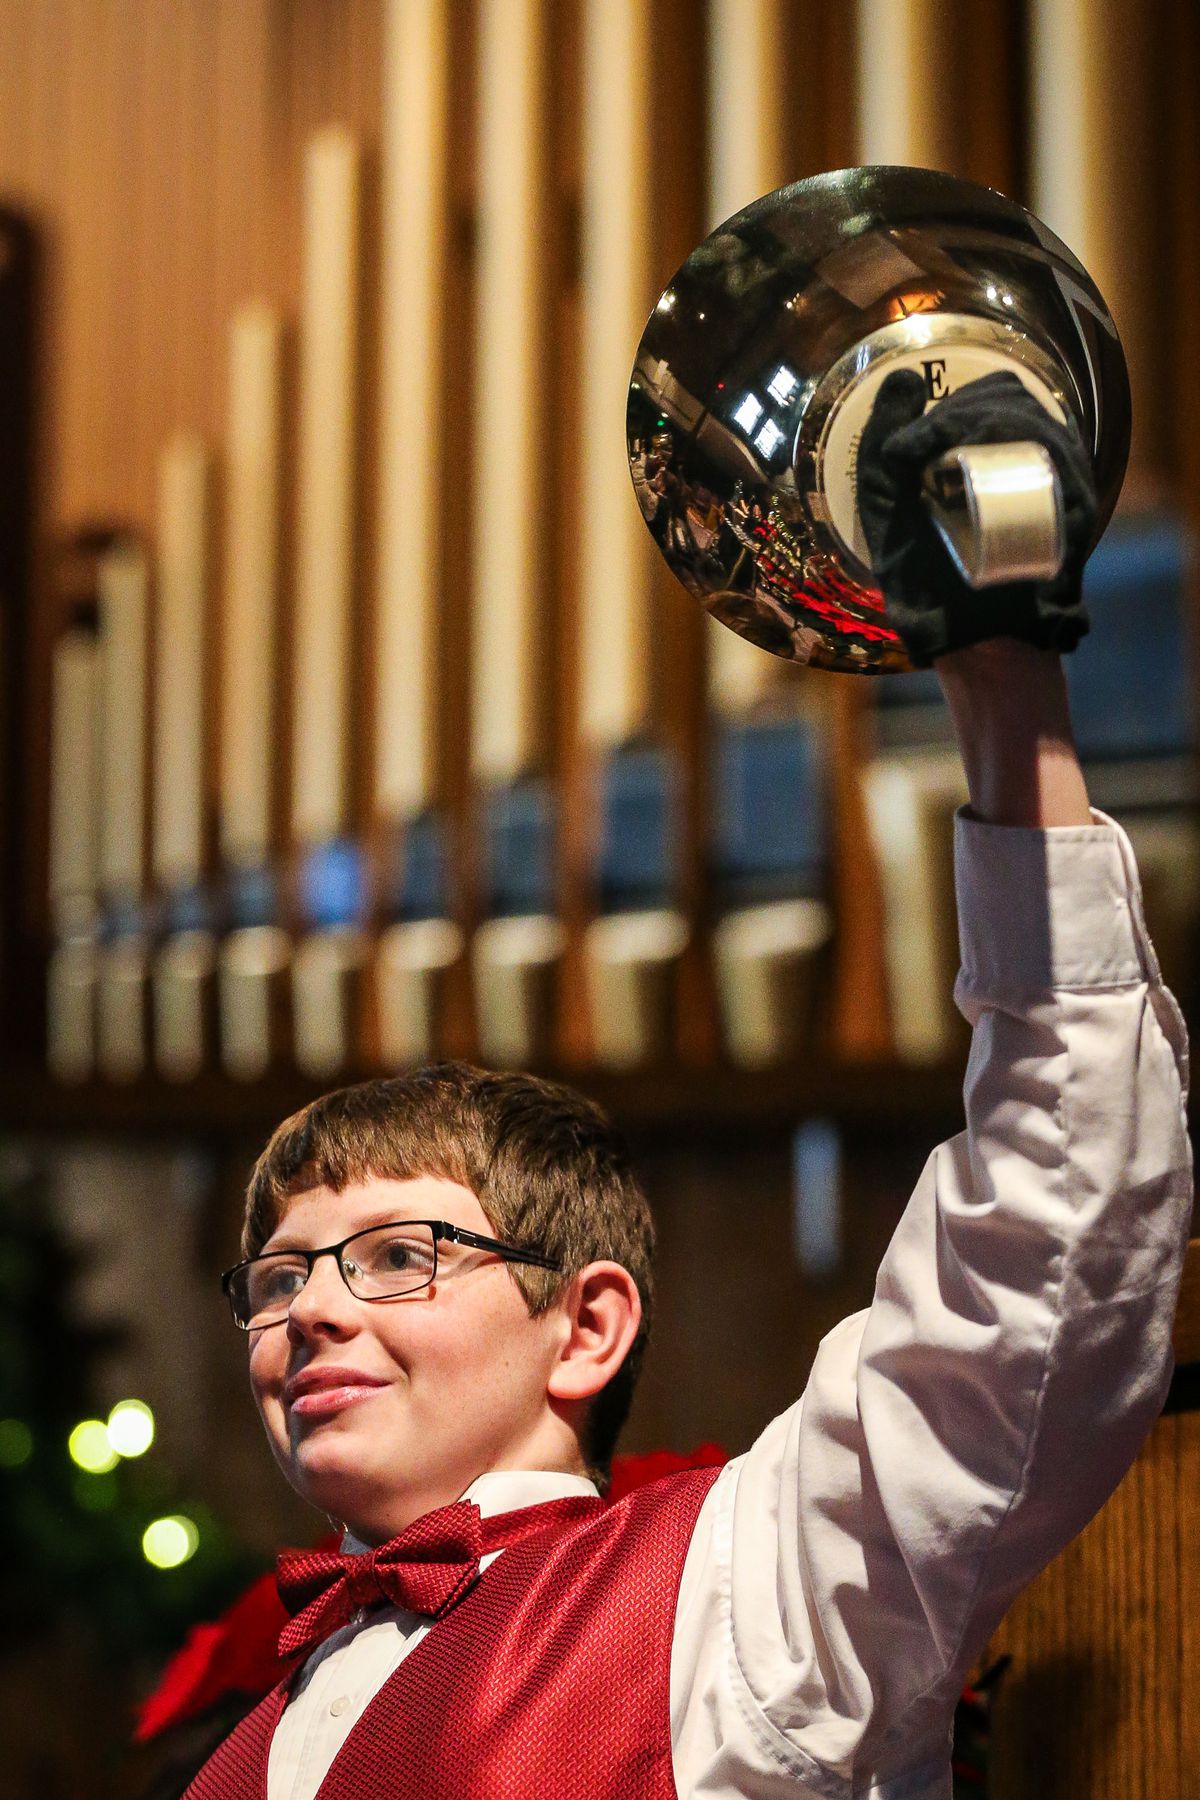 Barrett Carpenter, 14, performs with The Wesley Bell Ringers at Christ United Methodist Church in Salt Lake City on Sunday, Dec. 16, 2018.